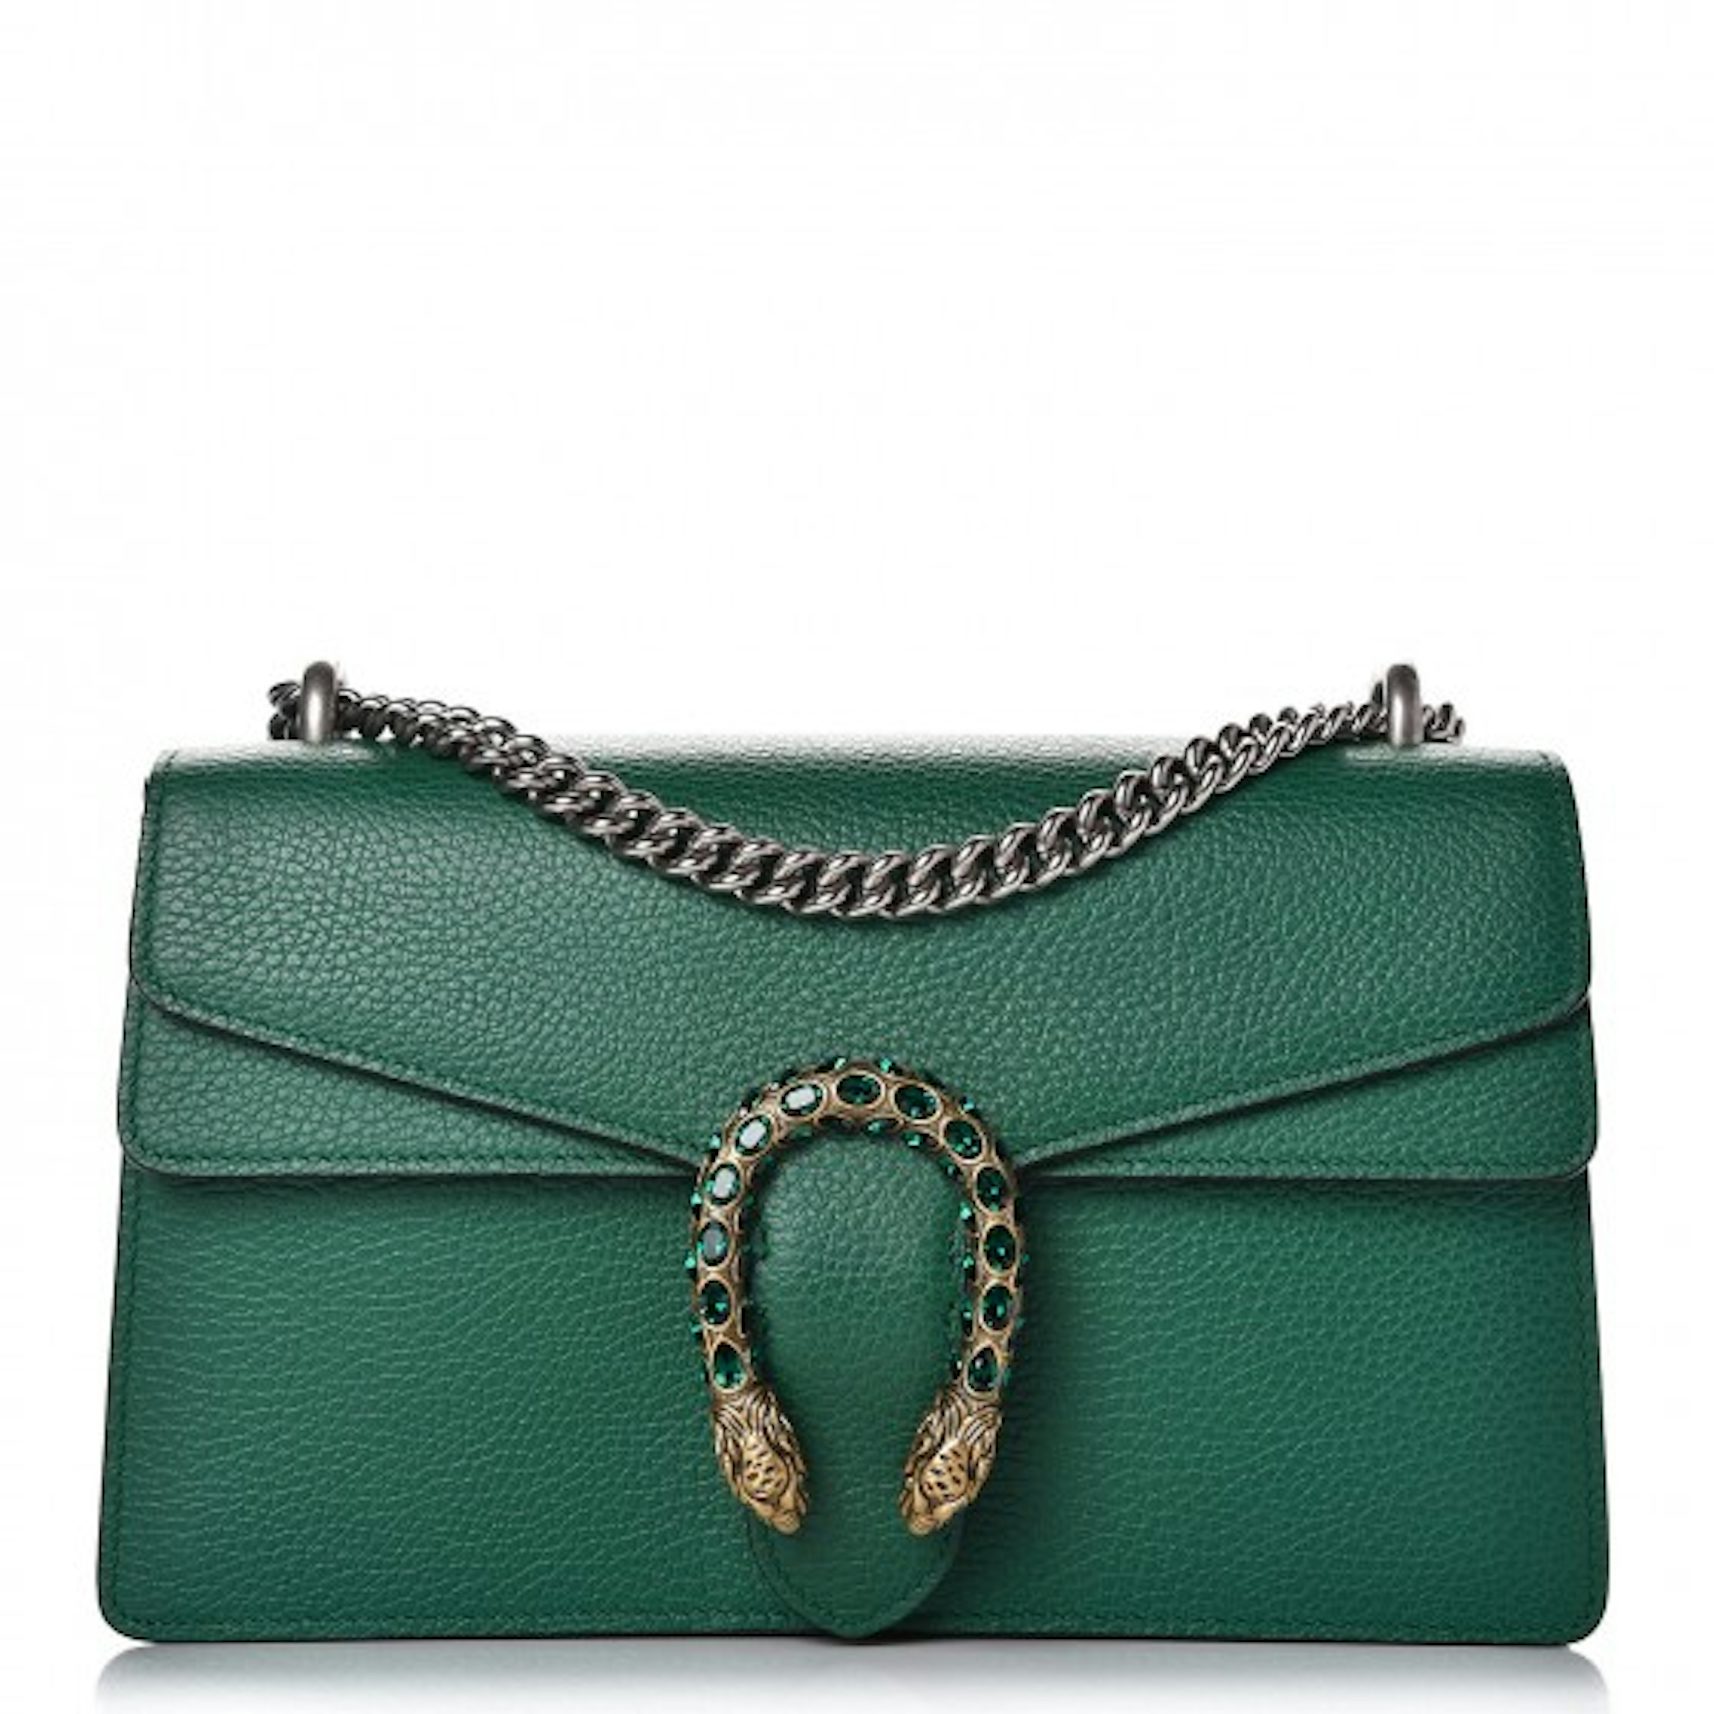 Gucci Dionysus Mini Embellished Textured-leather Tote - Green - One Size